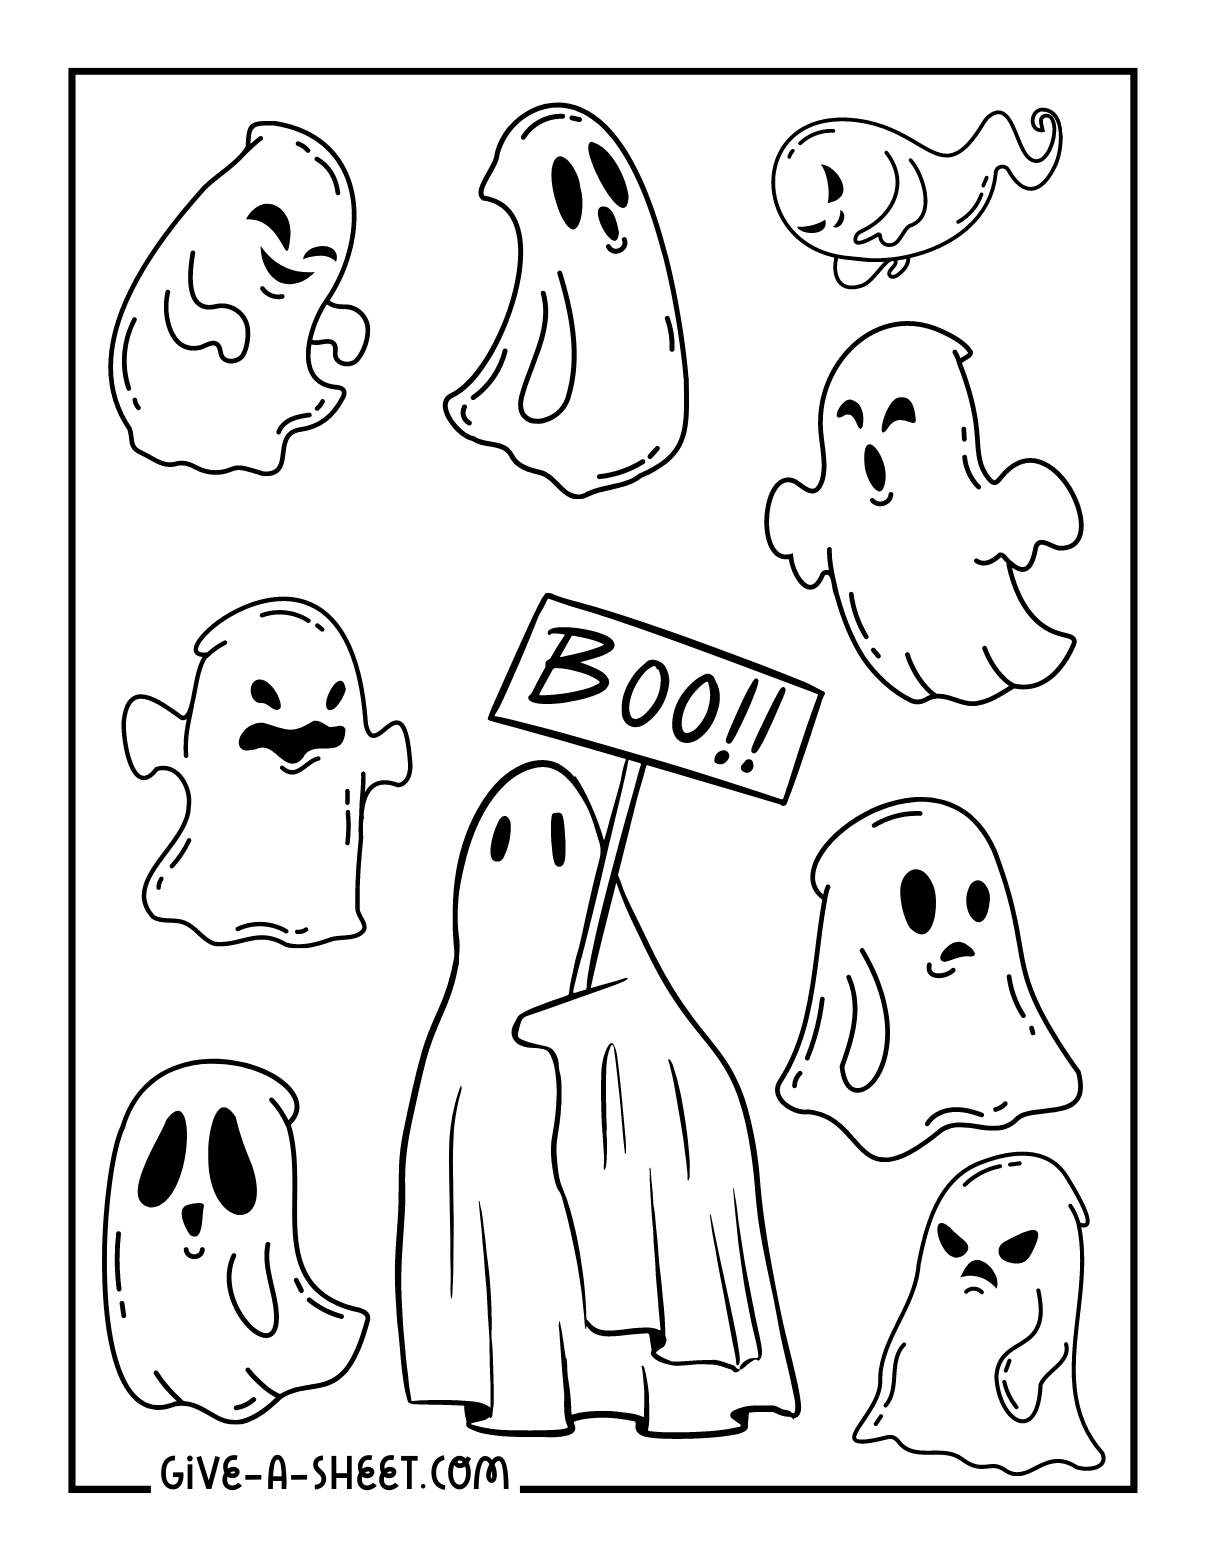 Ghost images halloween coloring pages.